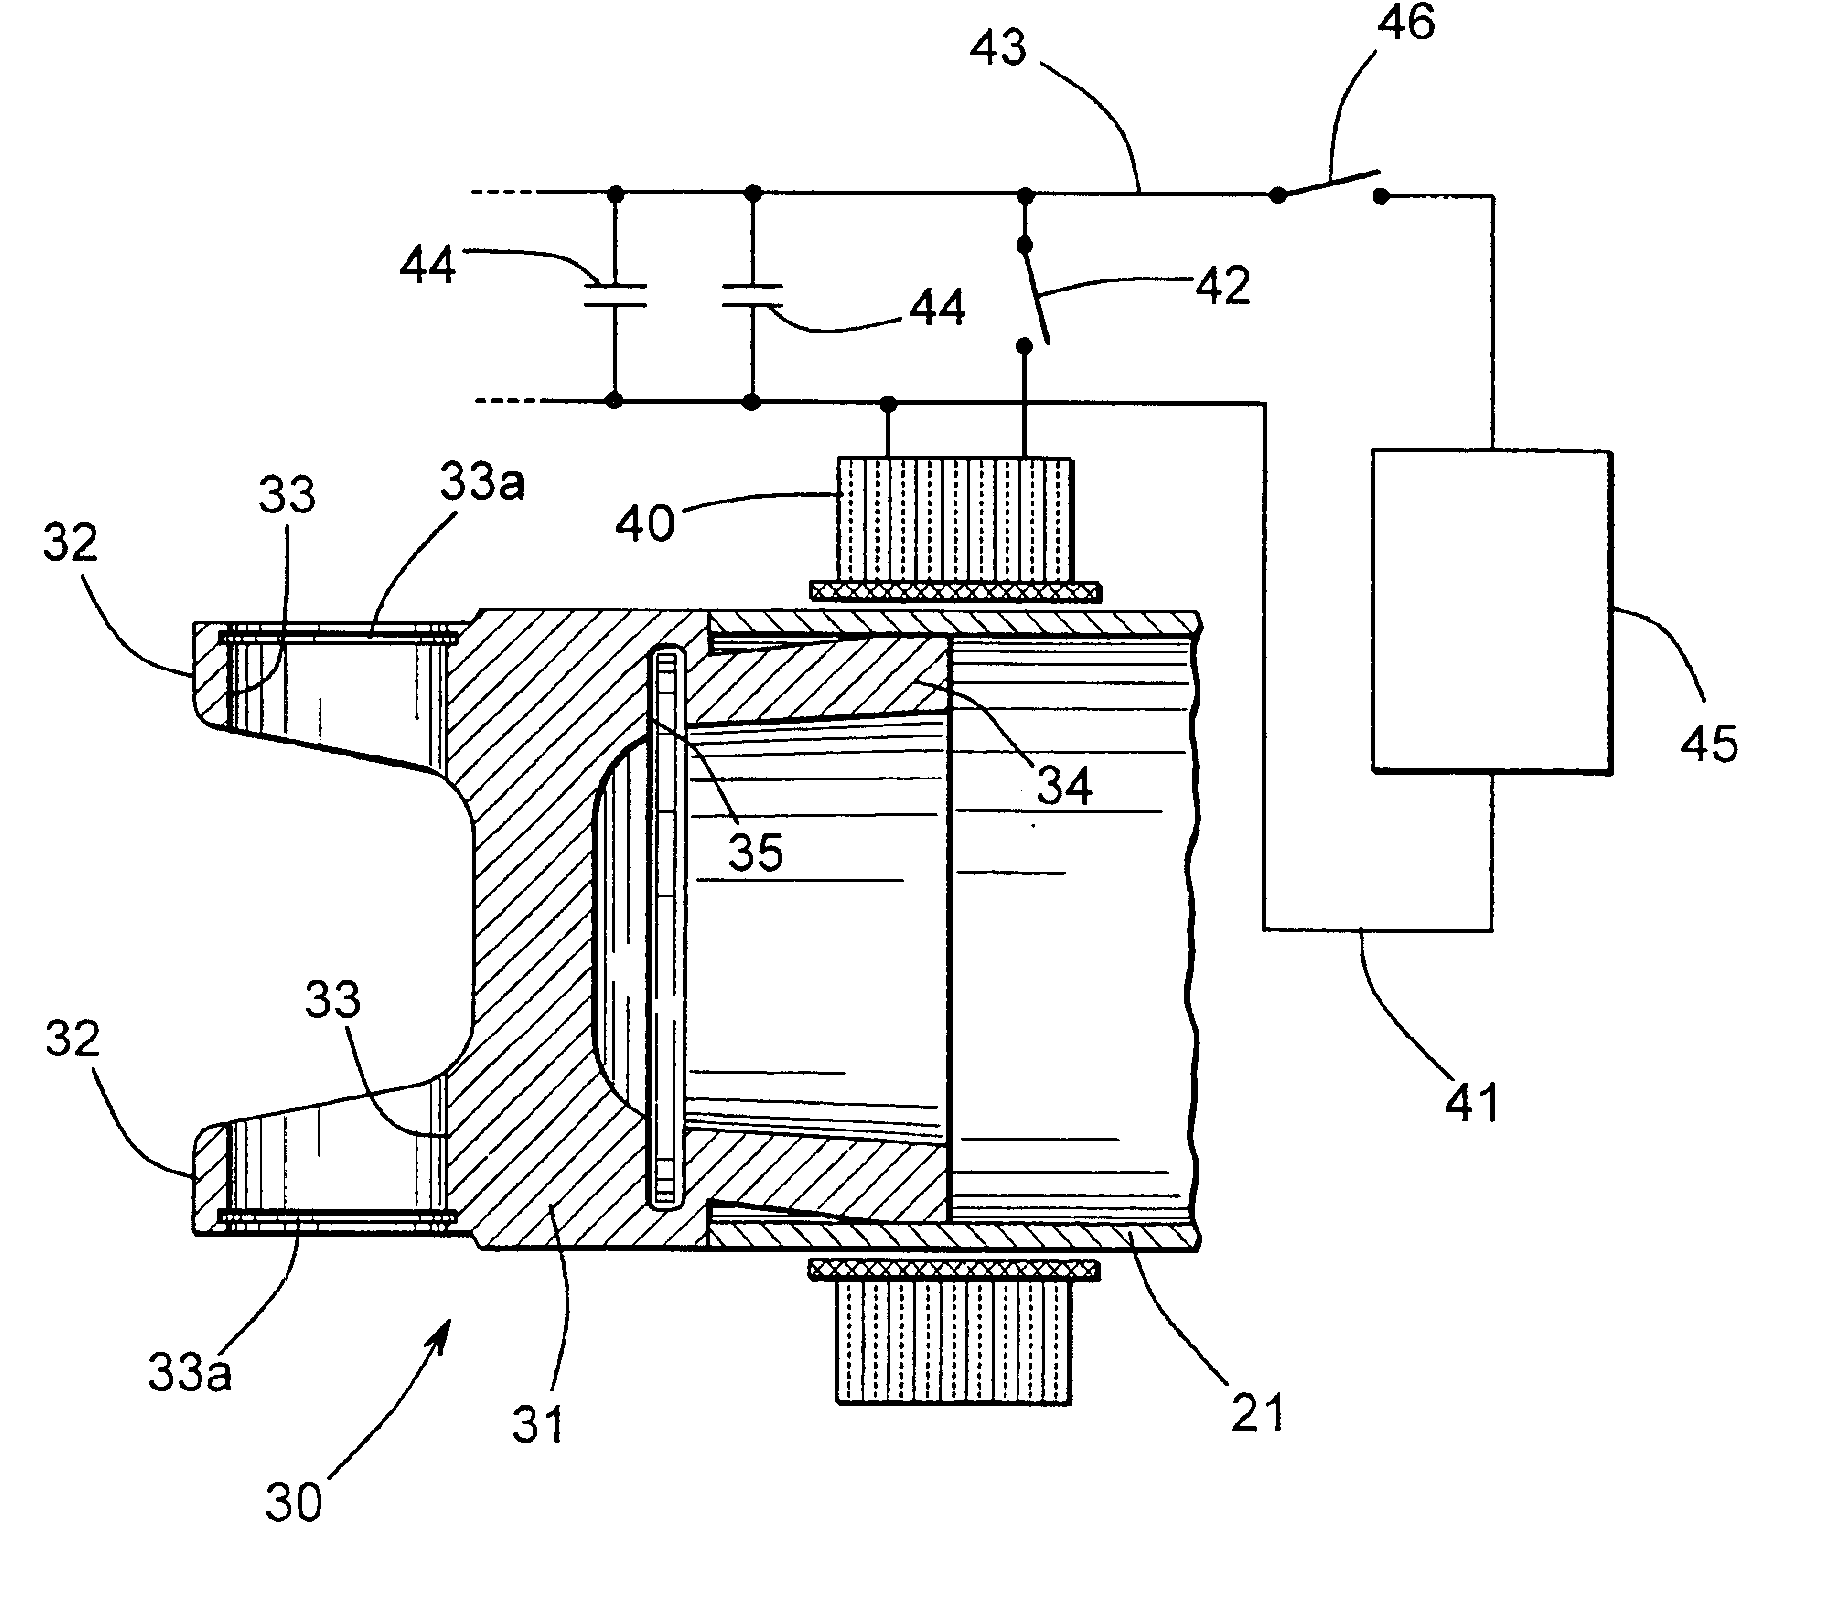 Method for securing a yoke to a tube using magnetic pulse welding techniques